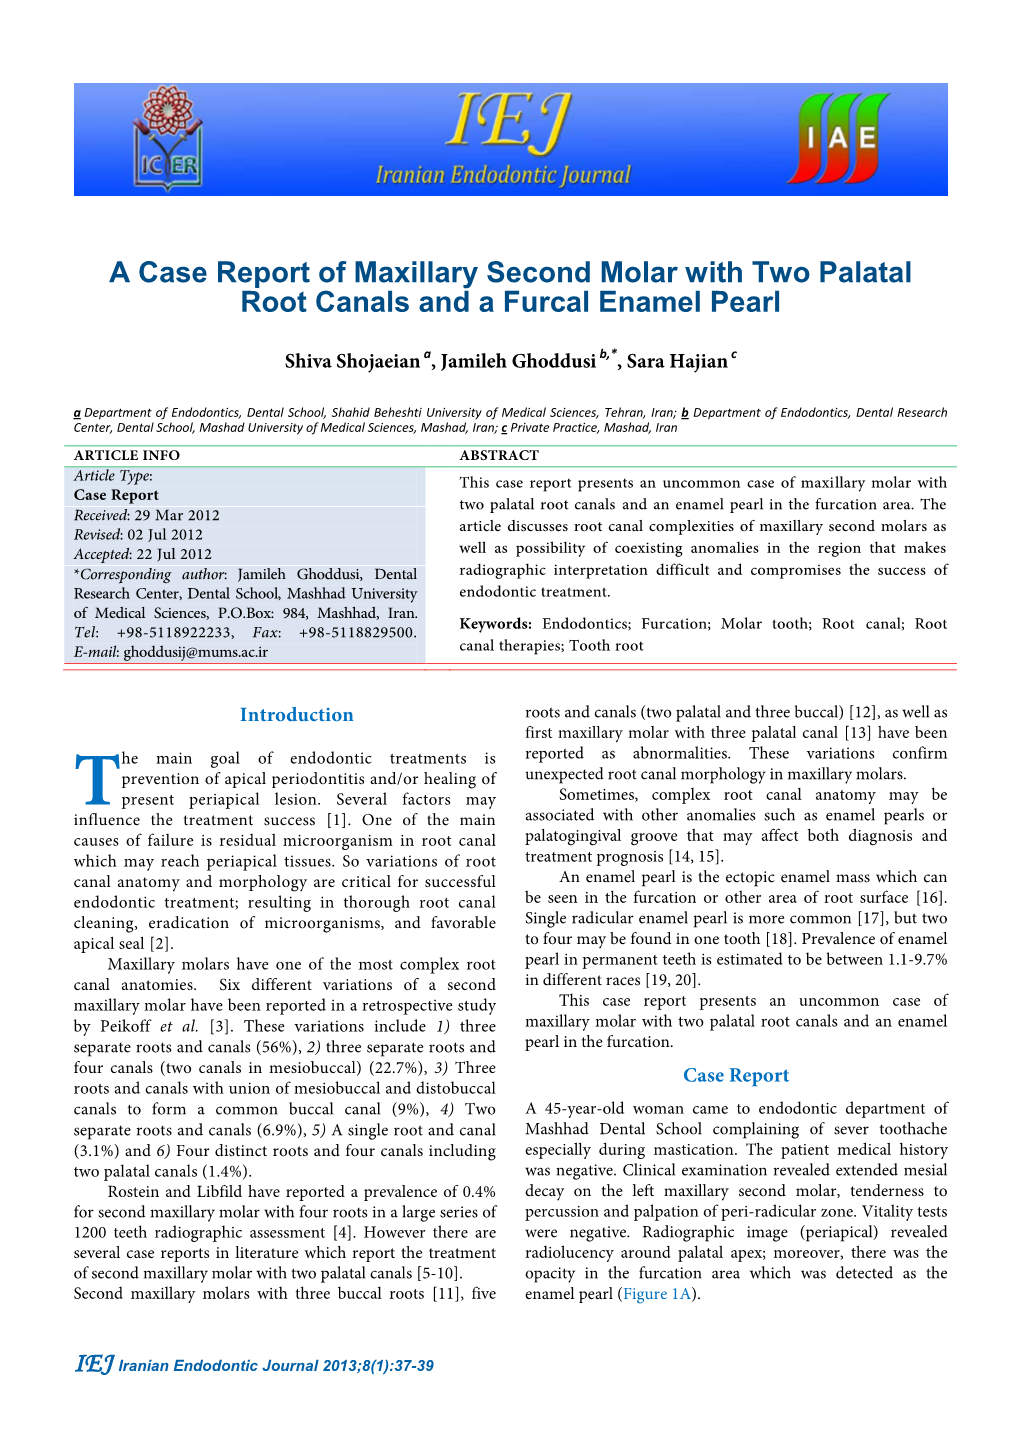 A Case Report of Maxillary Second Molar with Two Palatal Root Canals and a Furcal Enamel Pearl